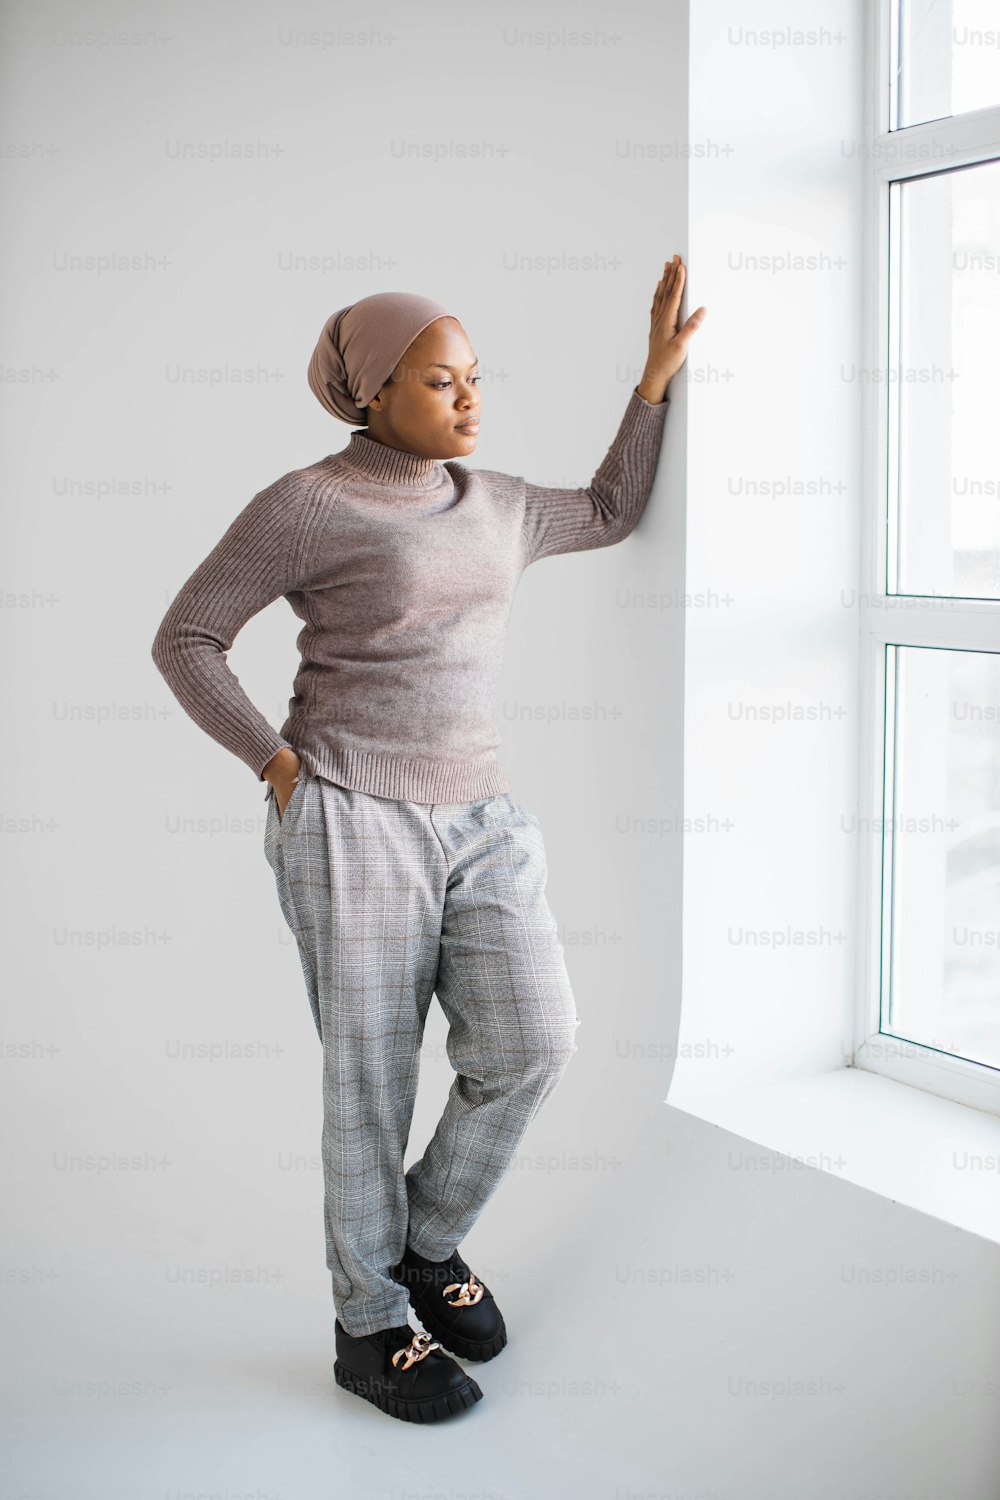 Attractive african american muslim woman in headscarf and casual clothes standing in studio with white background and looking at window. Concept of people and lifestyles.